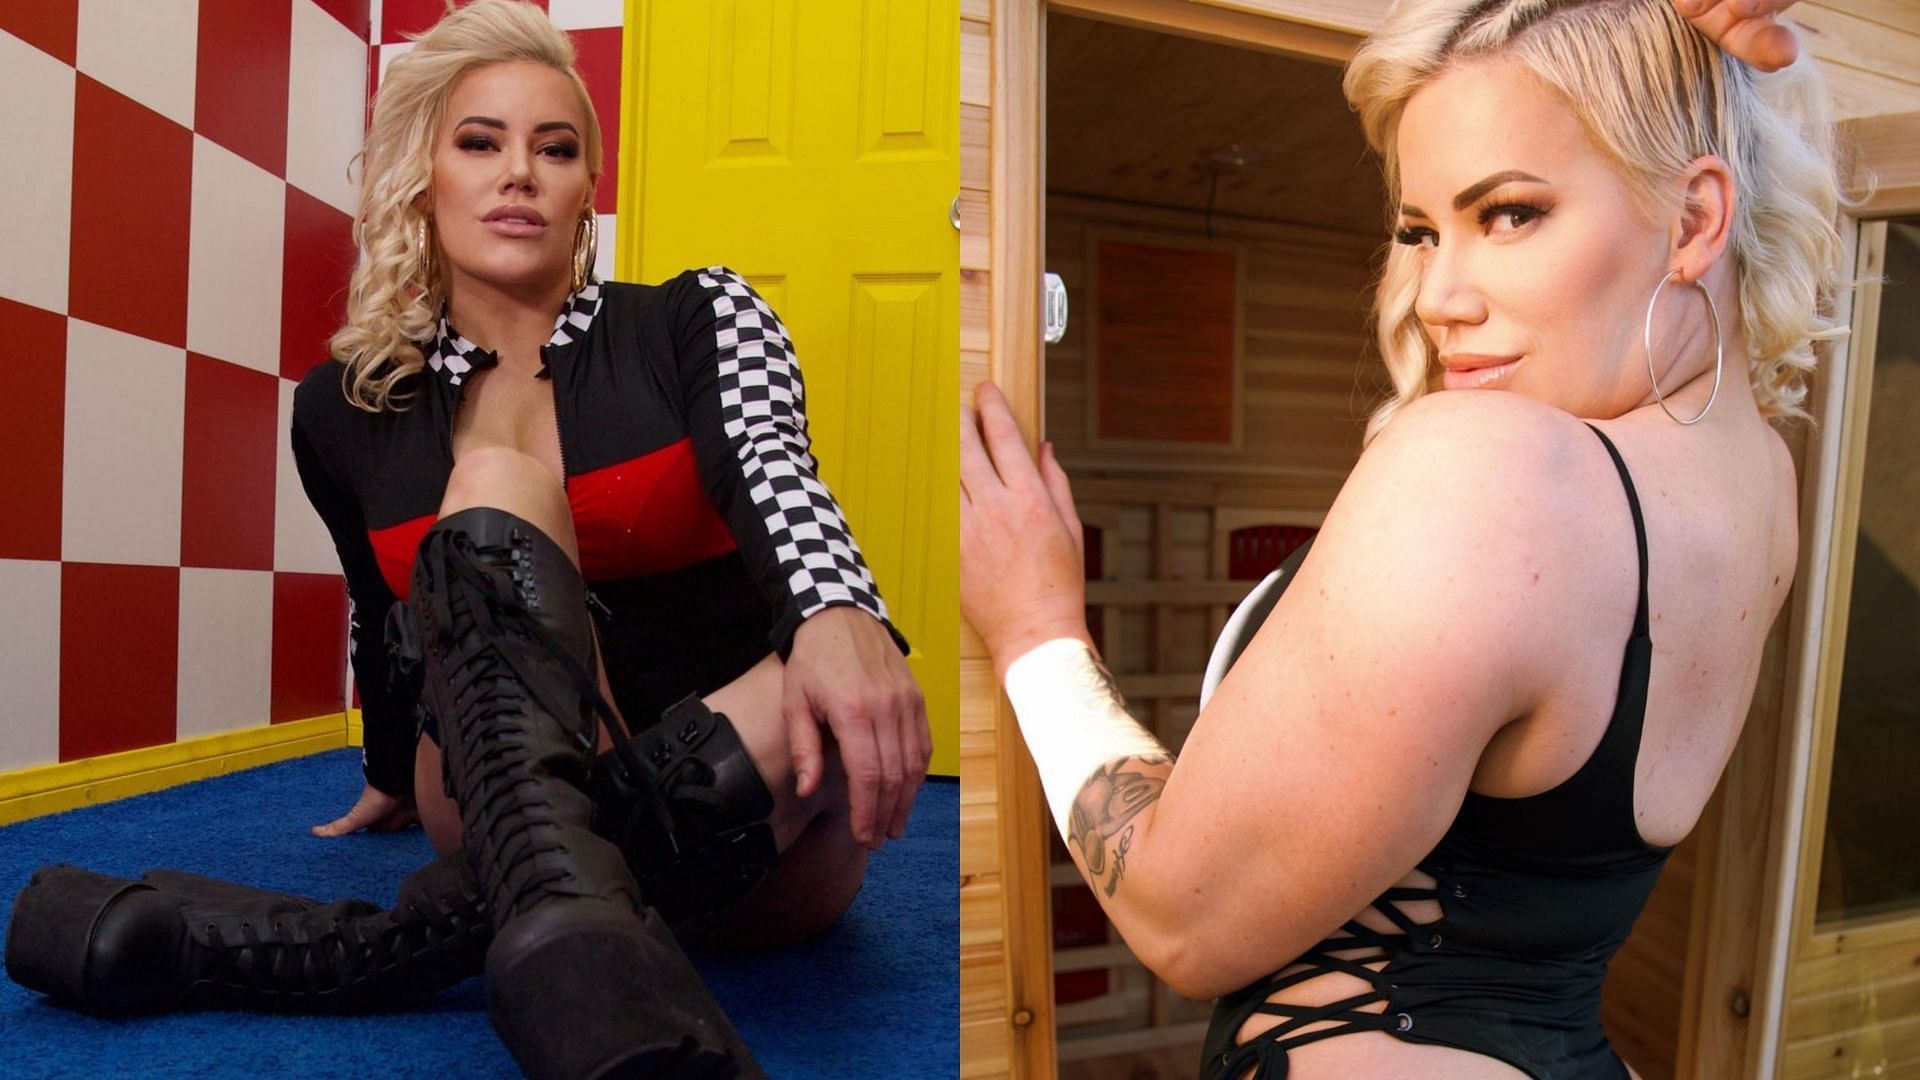 Taya Valkyrie had a brief run in WWE before joining AEW